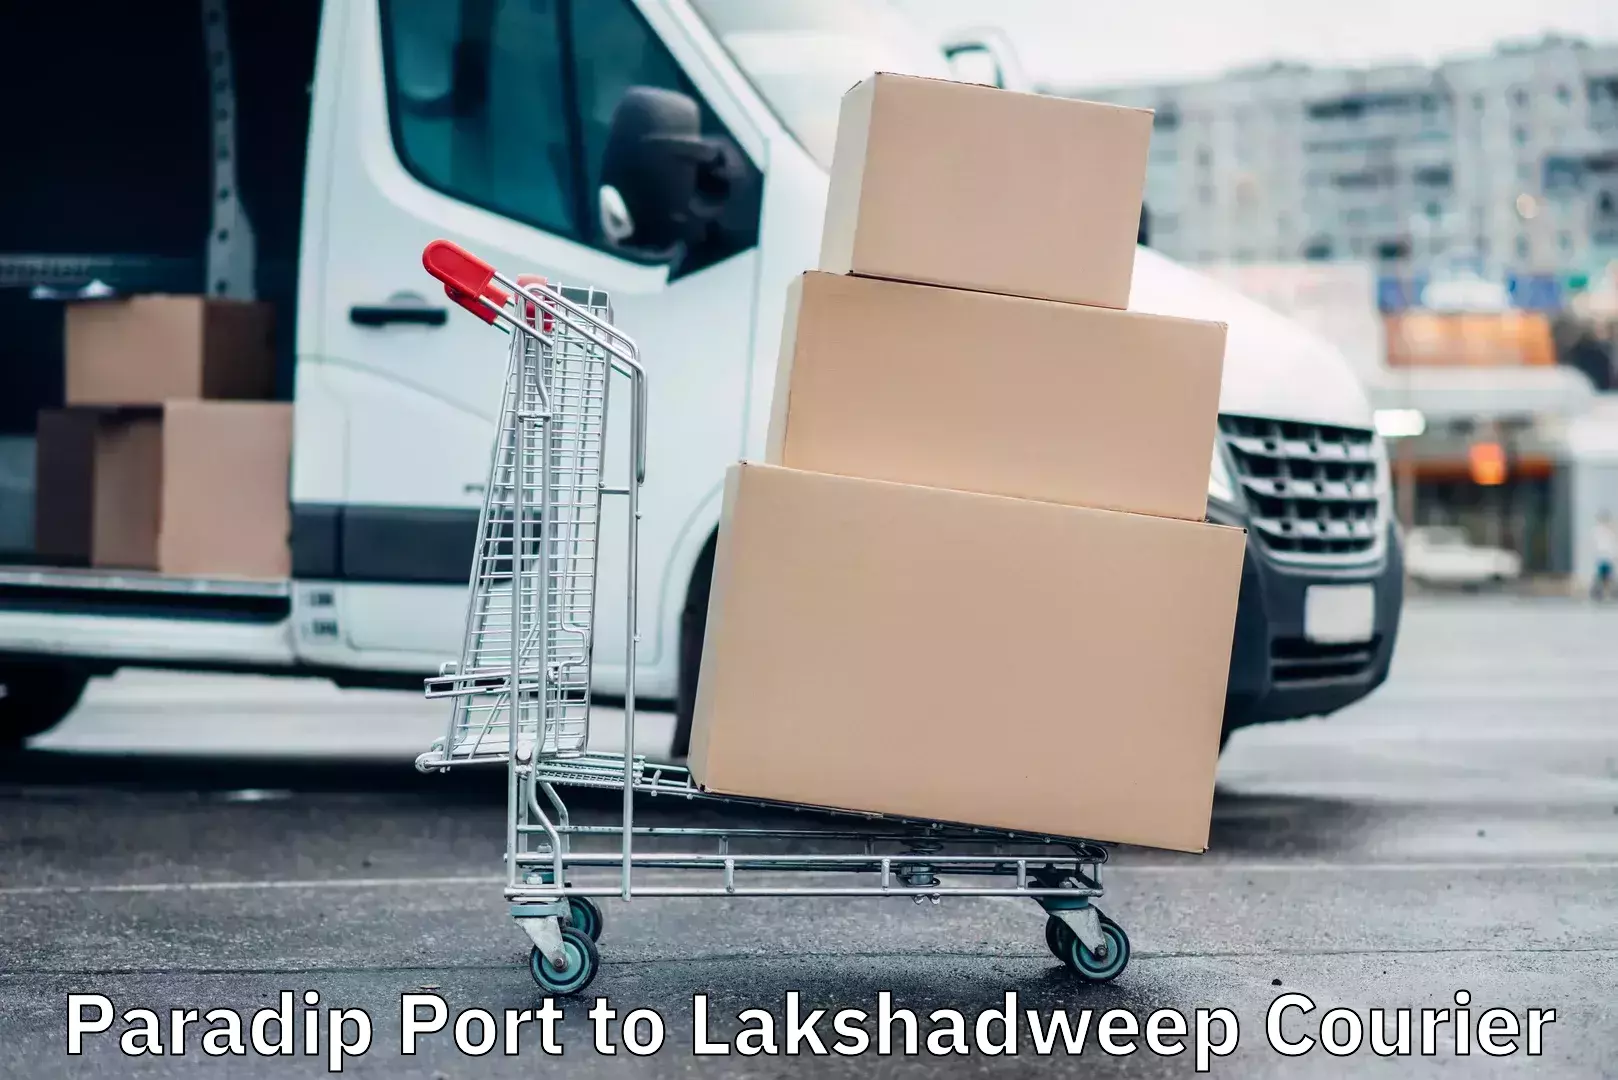 Local delivery service Paradip Port to Lakshadweep